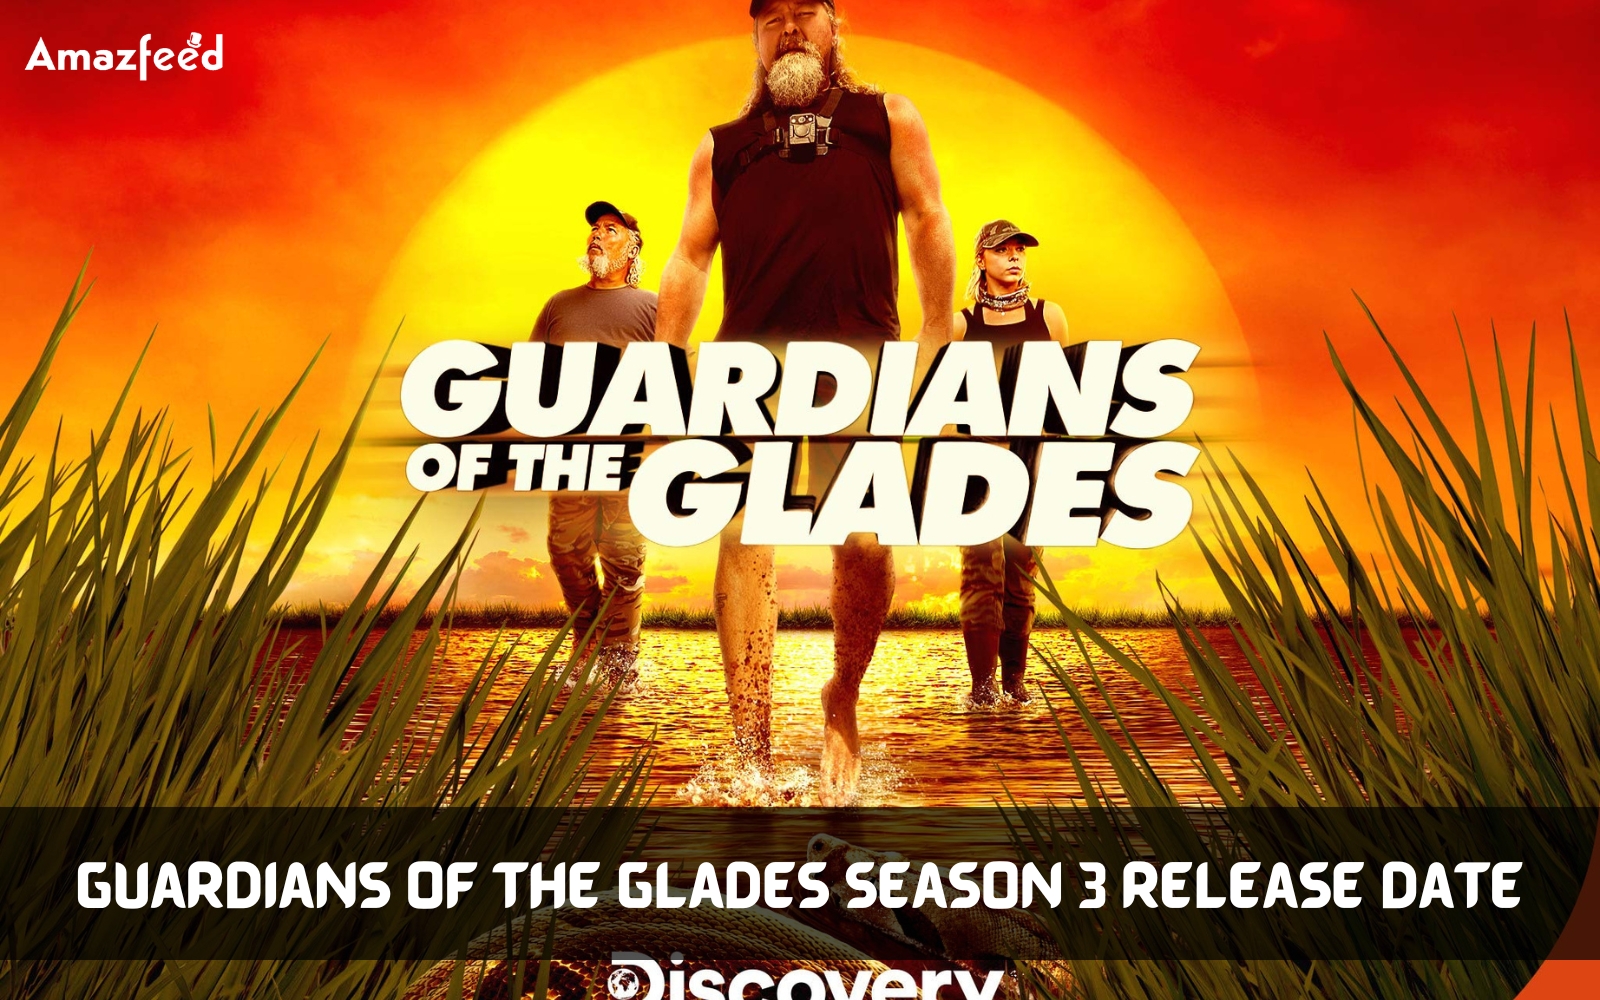 What is the Release Date of Guardians of the Glades Season 3?